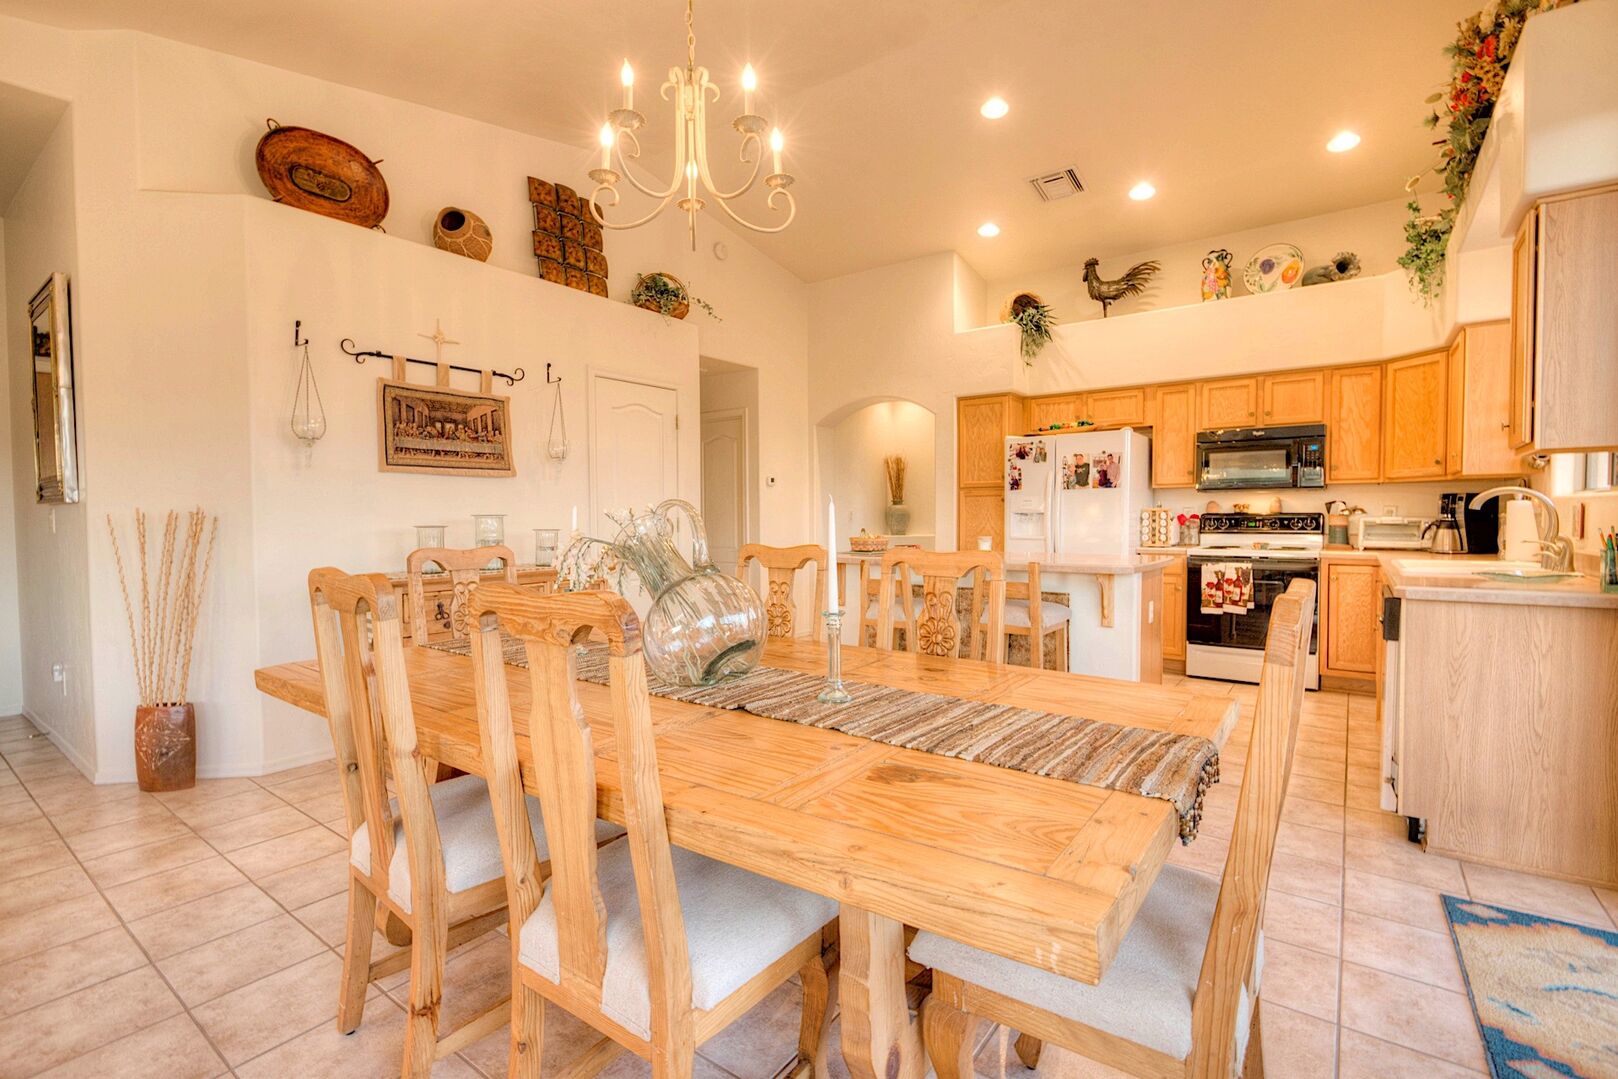 Bright, warm open kitchen and dining